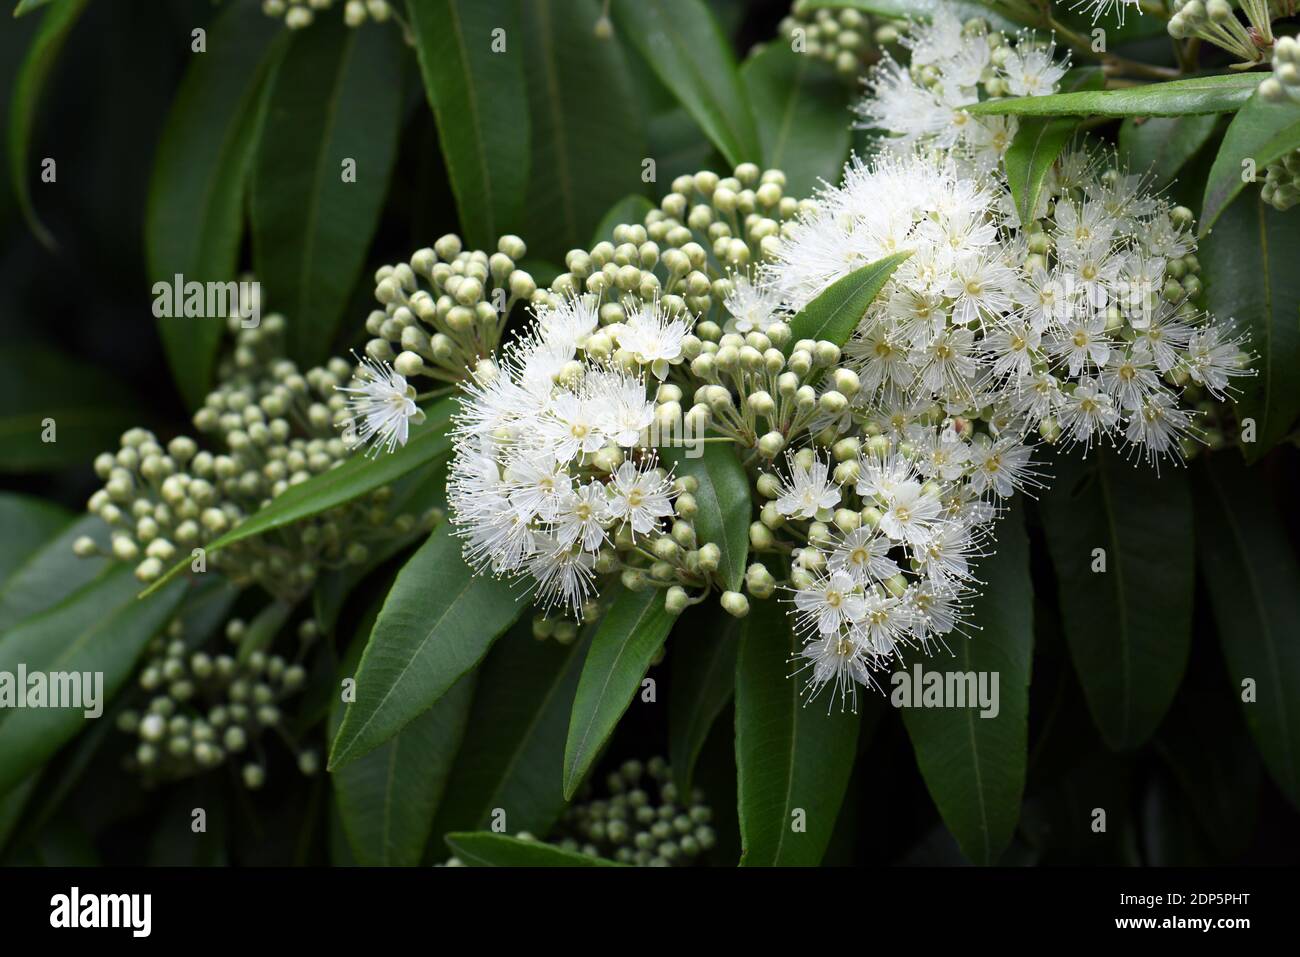 White and buds of the Australian native Lemon Myrtle, Backhousia citriodora, family Myrtaceae. Endemic to coastal rainforest New South Wales Stock Photo - Alamy